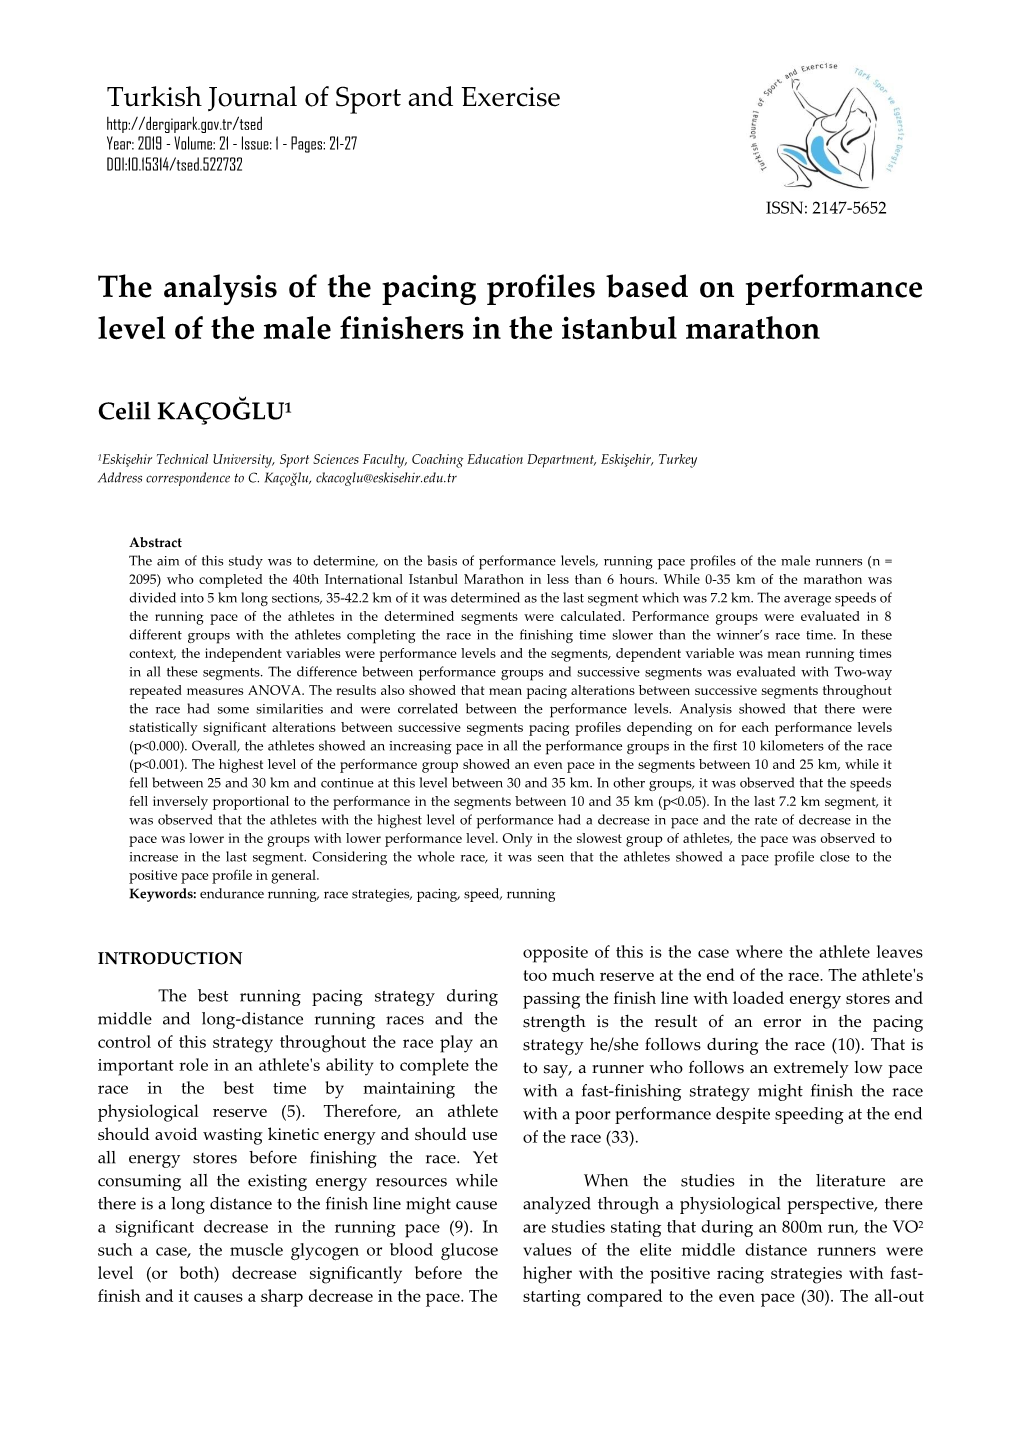 The Analysis of the Pacing Profiles Based on Performance Level of the Male Finishers in the Istanbul Marathon